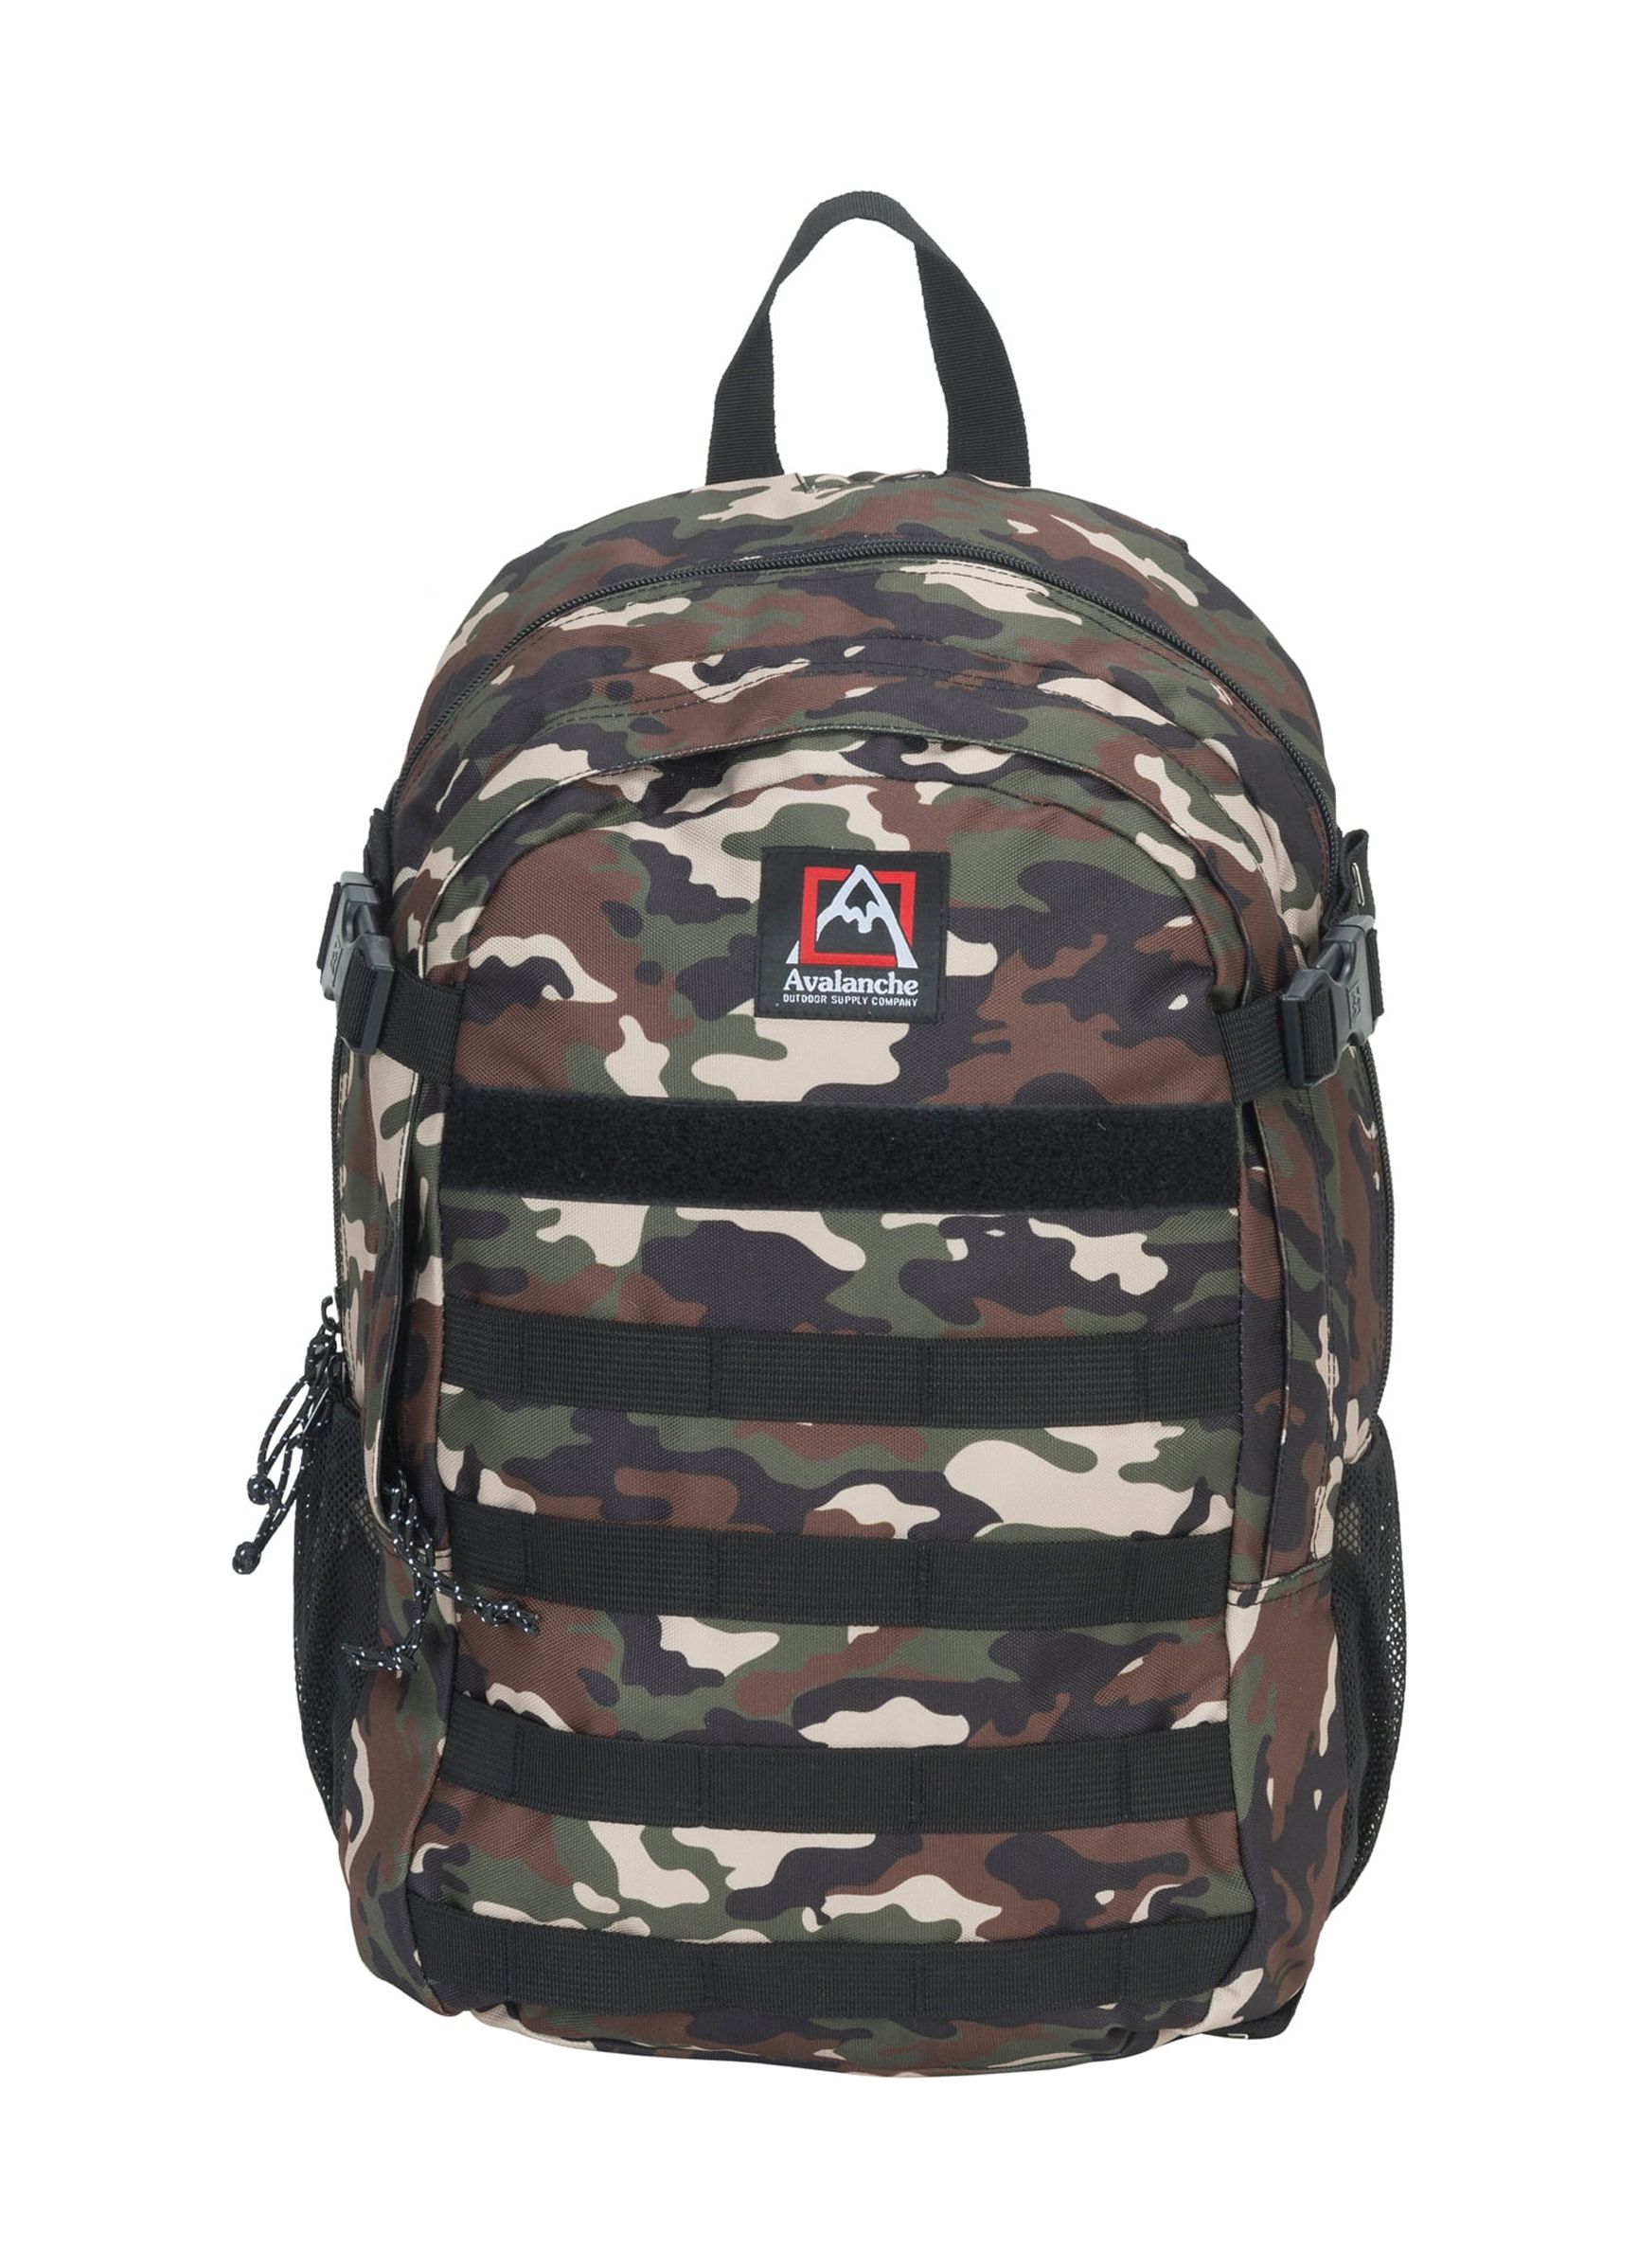 Avalanche Outdoors Camo 22 Liter Sports Hiking Backpack With Water Bottle Pockets - image 1 of 4